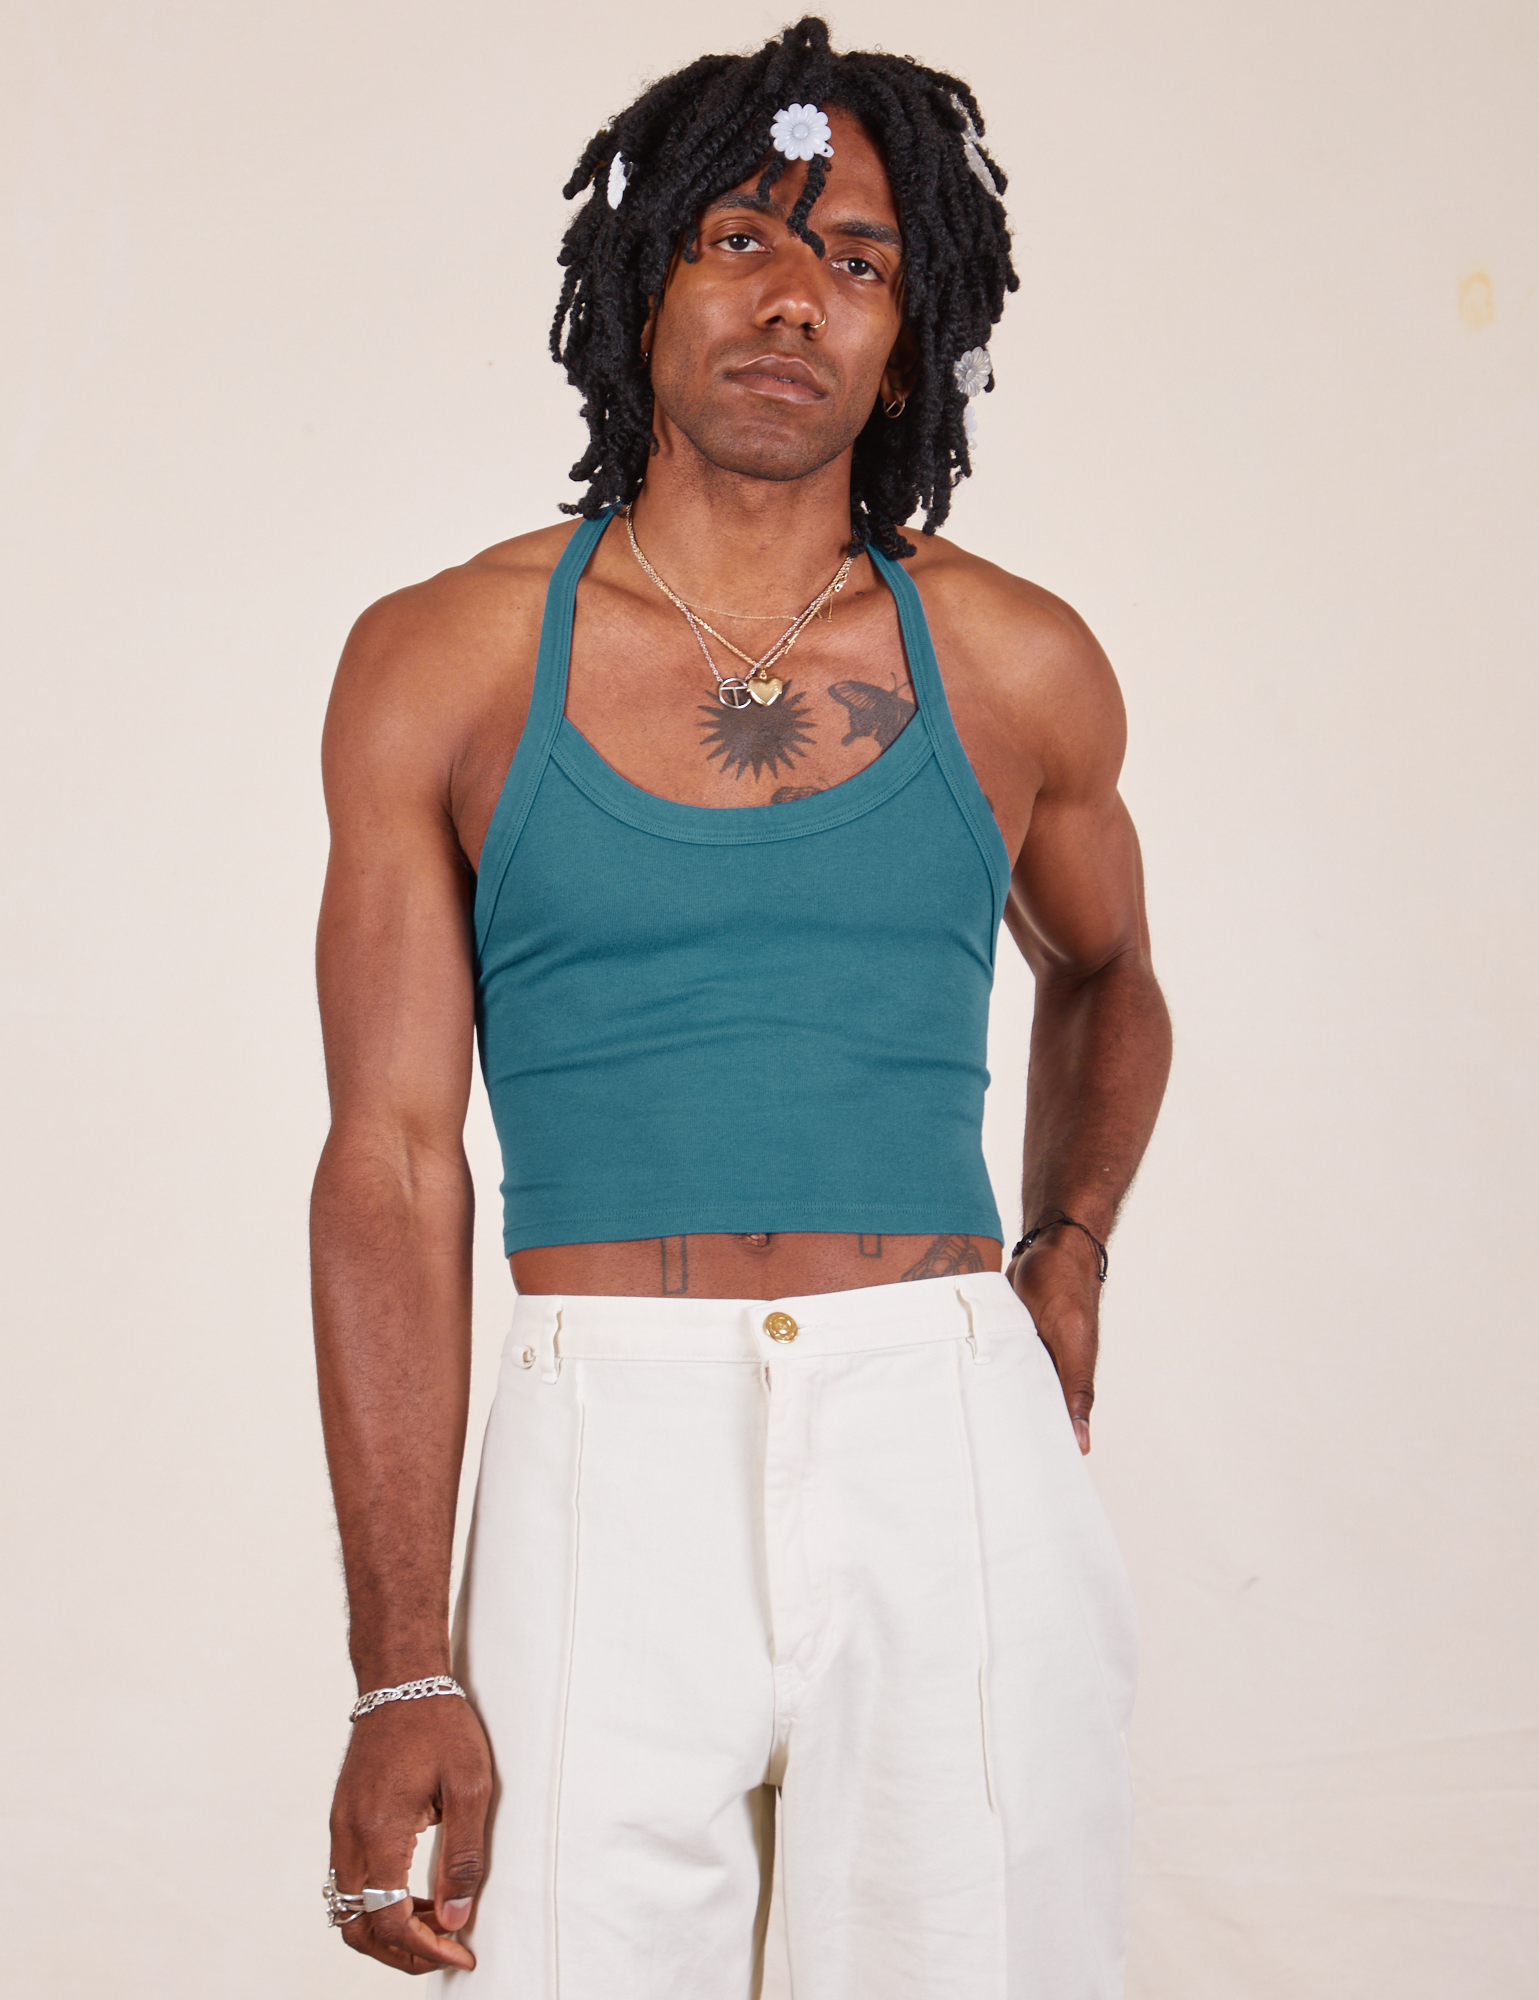 Jerrod is 6&#39;3&quot; and wearing XS Halter Top in Marine Blue